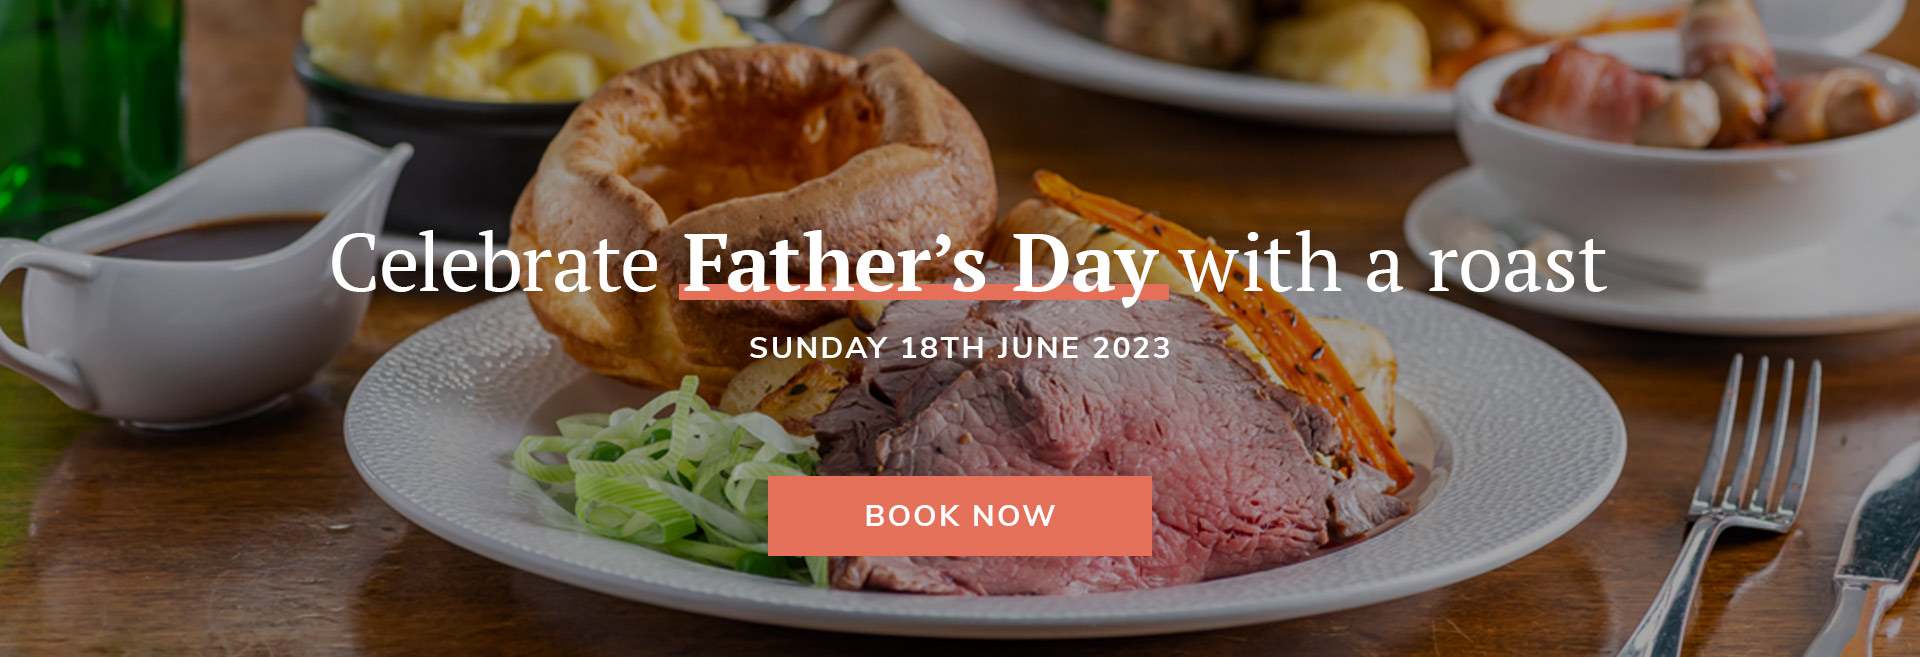 Father's Day at The Falcon